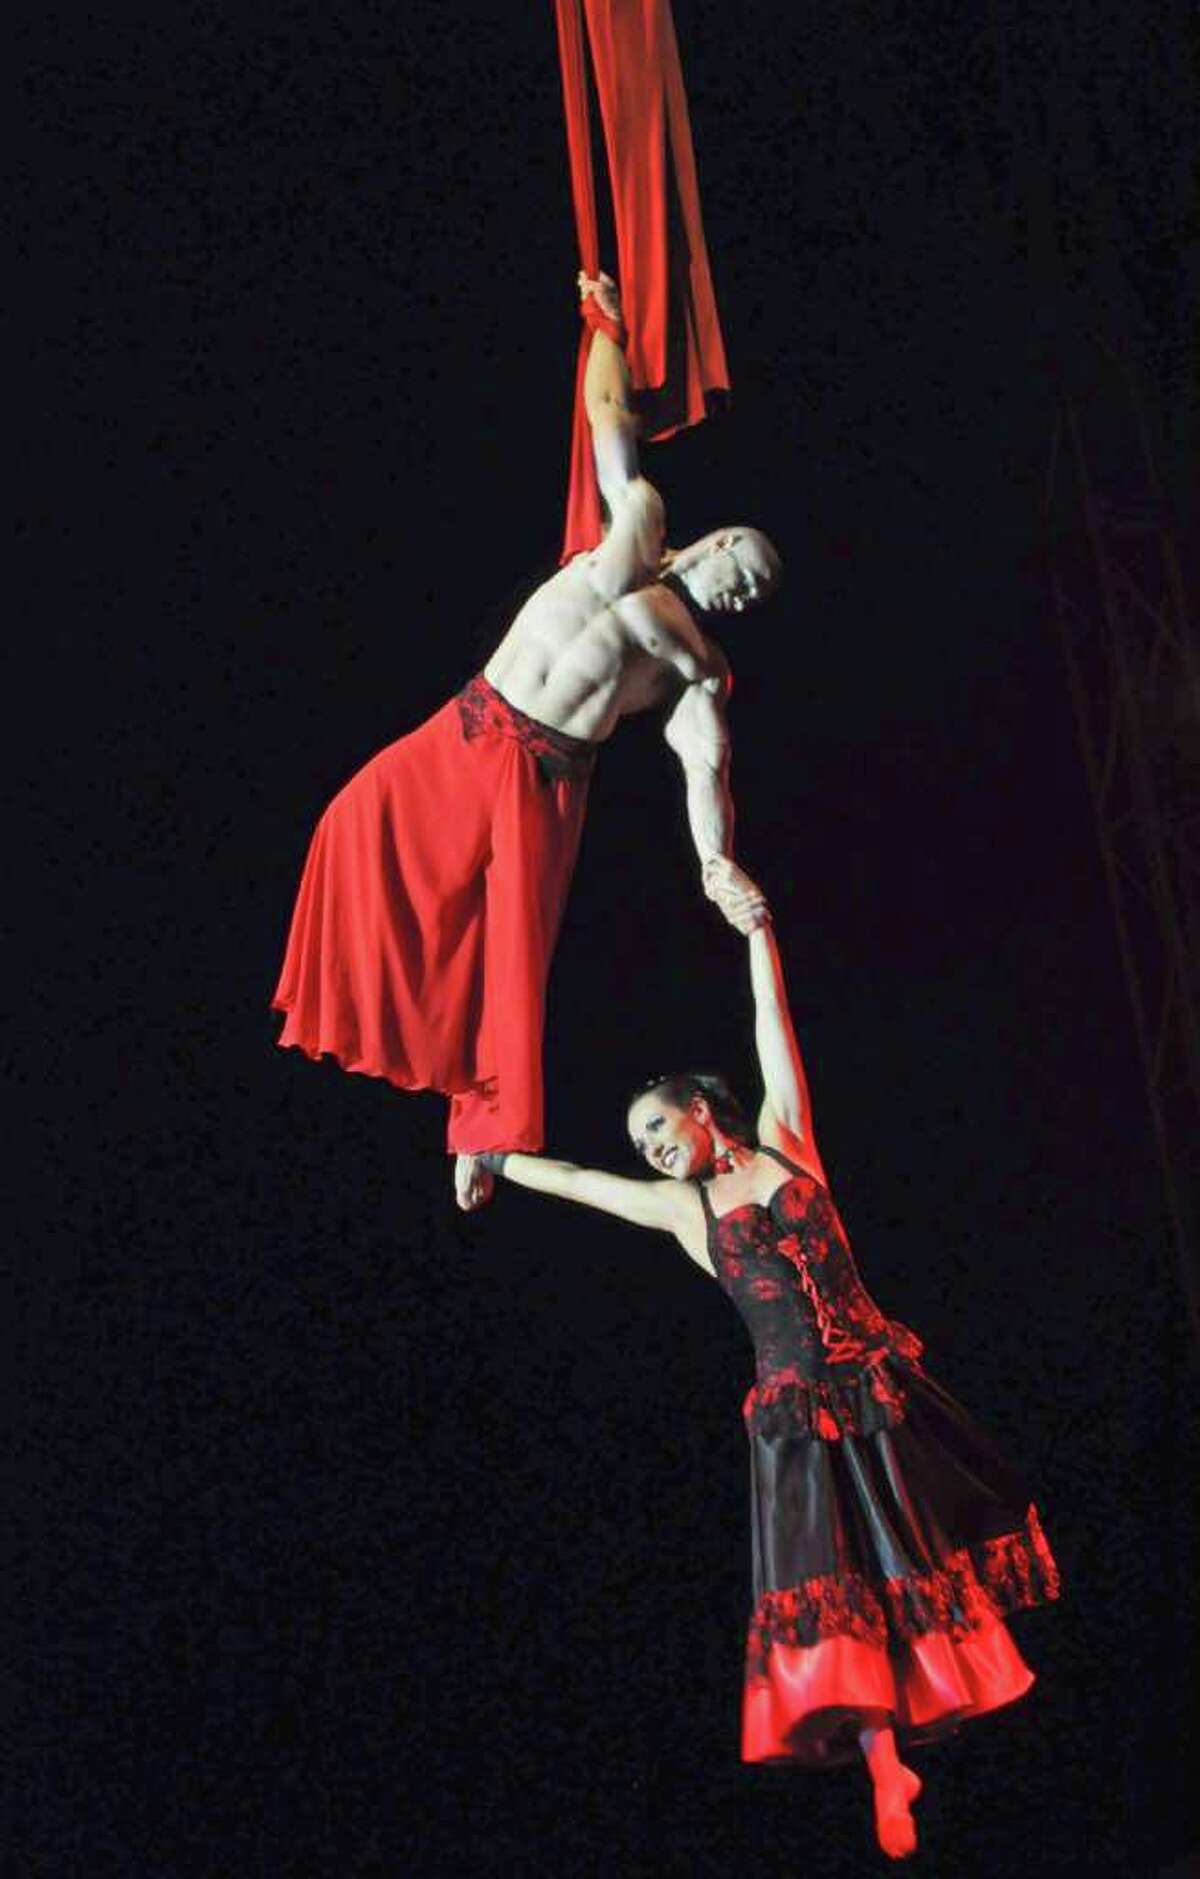 Havana is hosting the 10th International Festival of Circus "Circuba" from August 8 to 14, 2011, drawing more than 100 circus artists from 14 countries. Here, Priscila and Richard from the Brazilian UNICIRCO company perform on August 11.